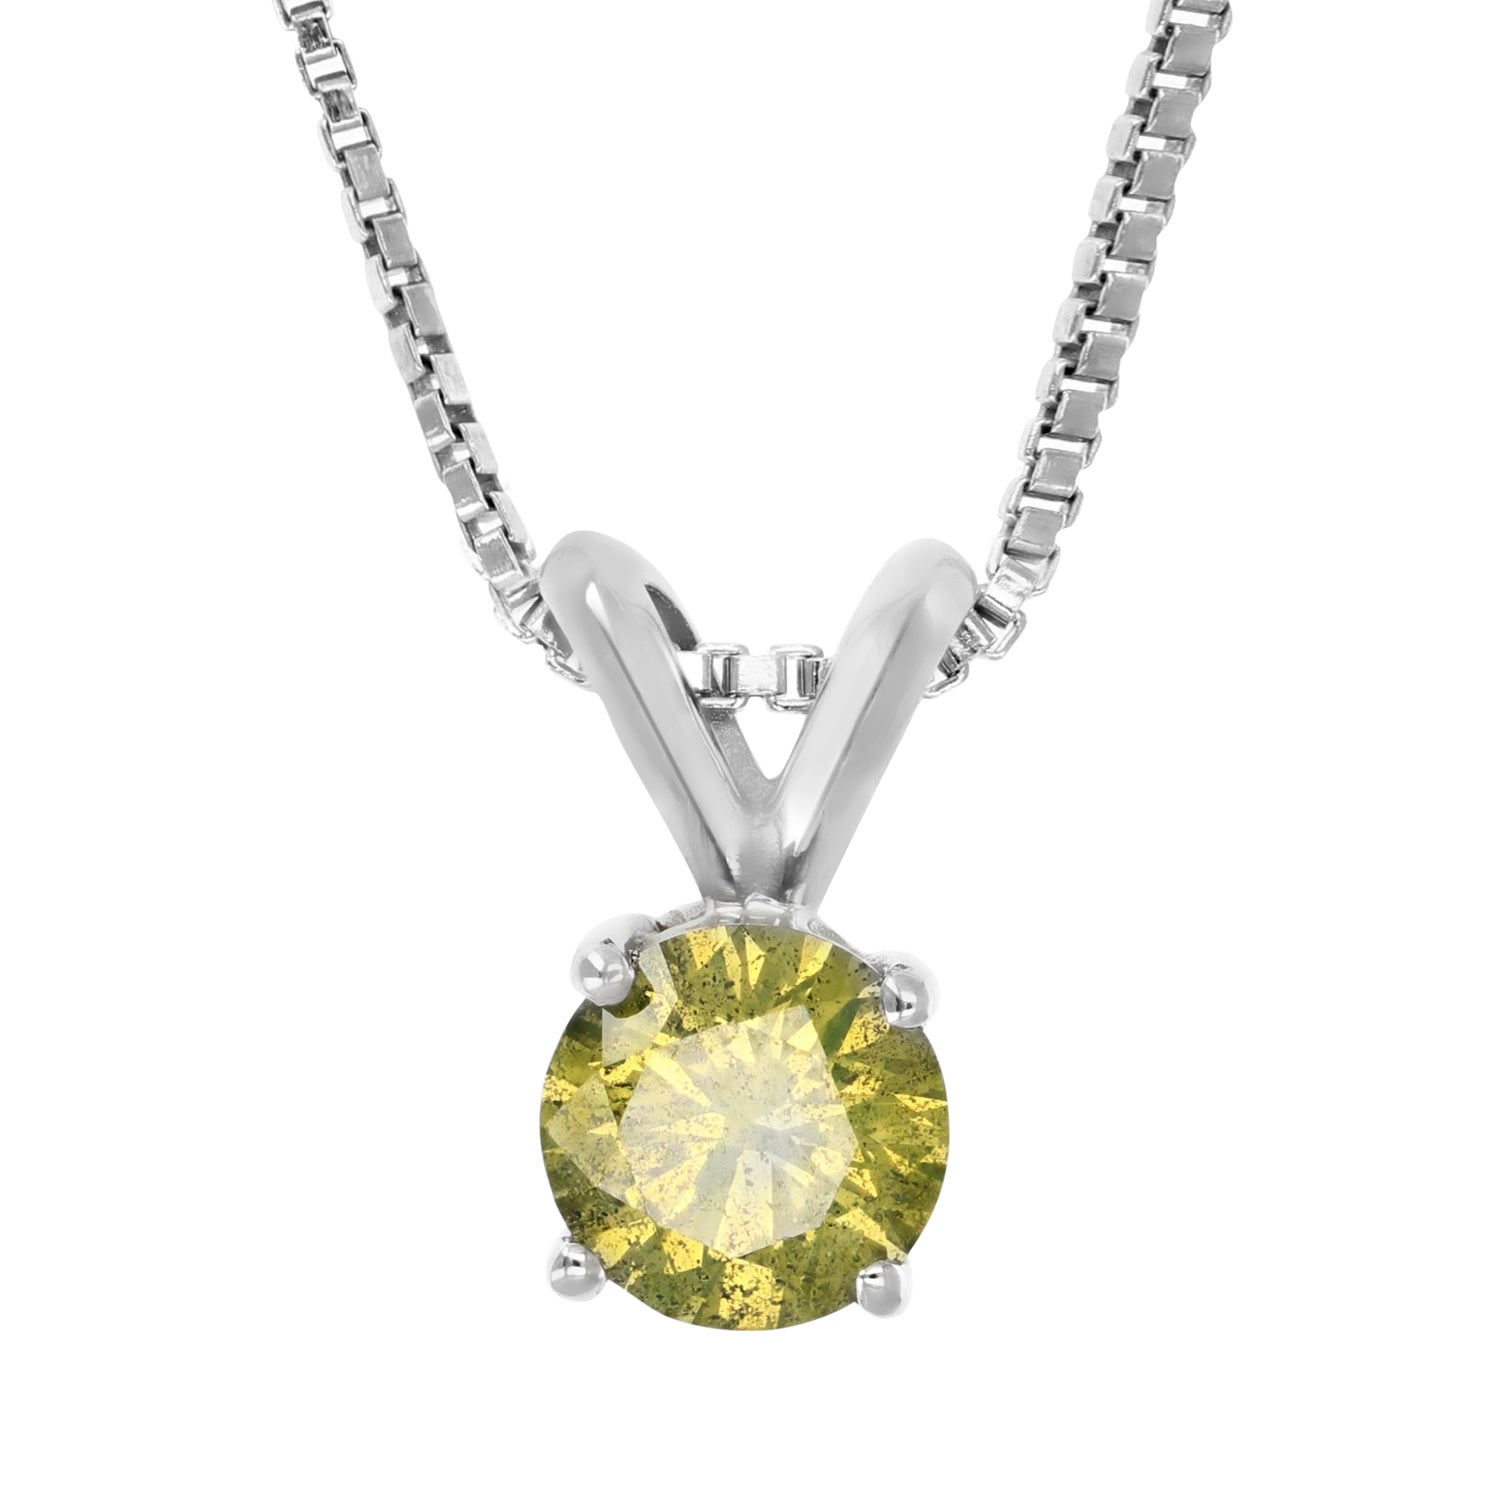 1/2 cttw Diamond Pendant, Yellow Diamond Solitaire Pendant Necklace for Women in 14K White Gold with 18 Inch Chain, Prong Setting